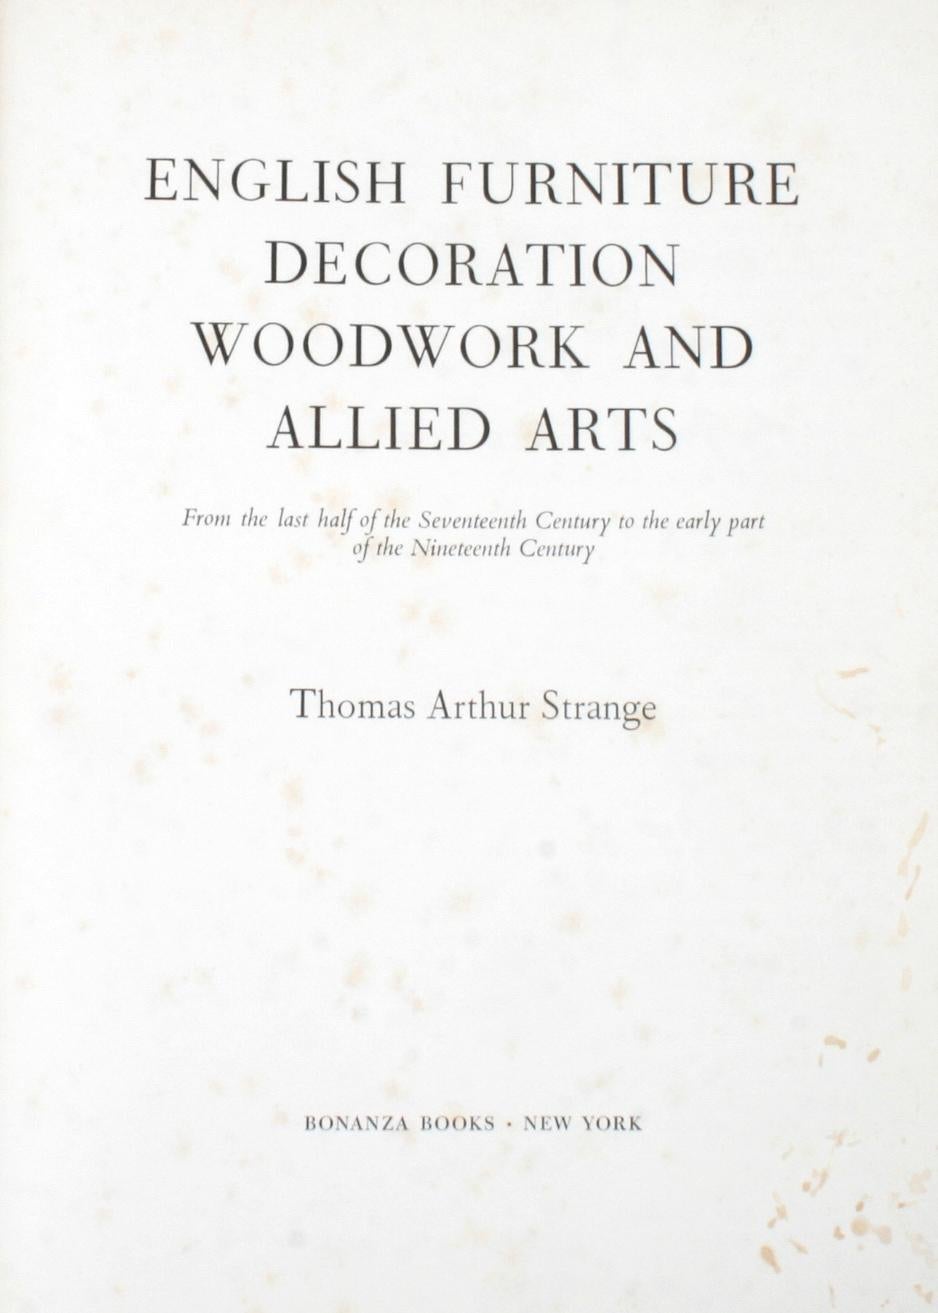 English furniture decoration woodwork and allied arts from the last half of the 17th century to the early part of the 19th century by Thomas Arthur Strange. New York: Bonanza Books, 1950. Hardcover with no dust jacket. 368 pp. A comprehensive